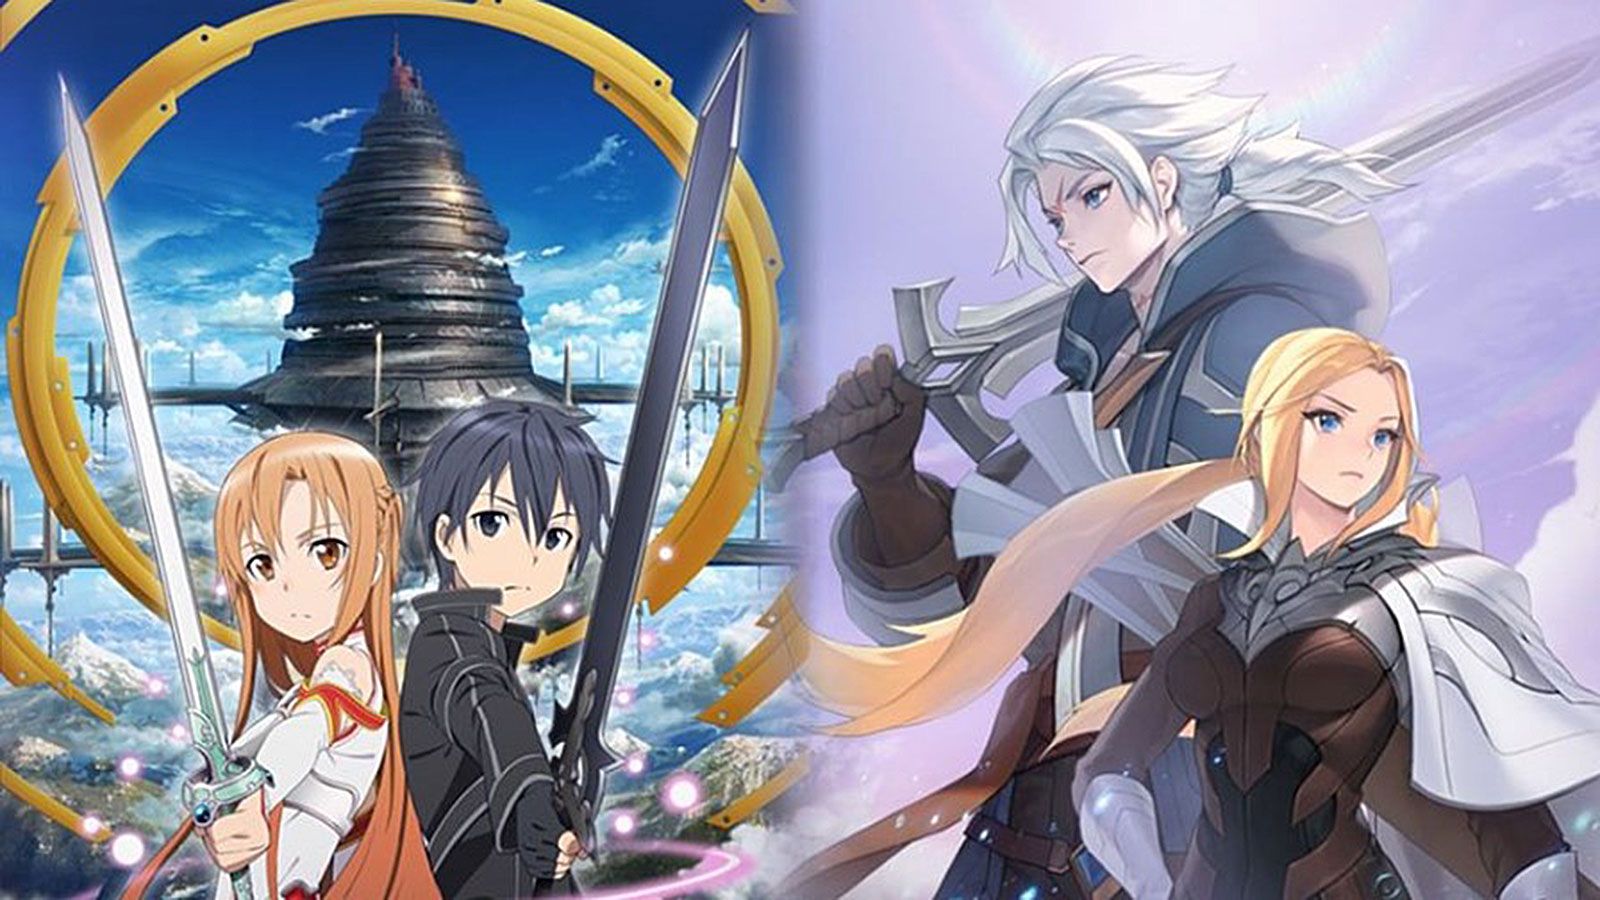 New Sword Art Online Game, Anime and Manga News Coming This Month